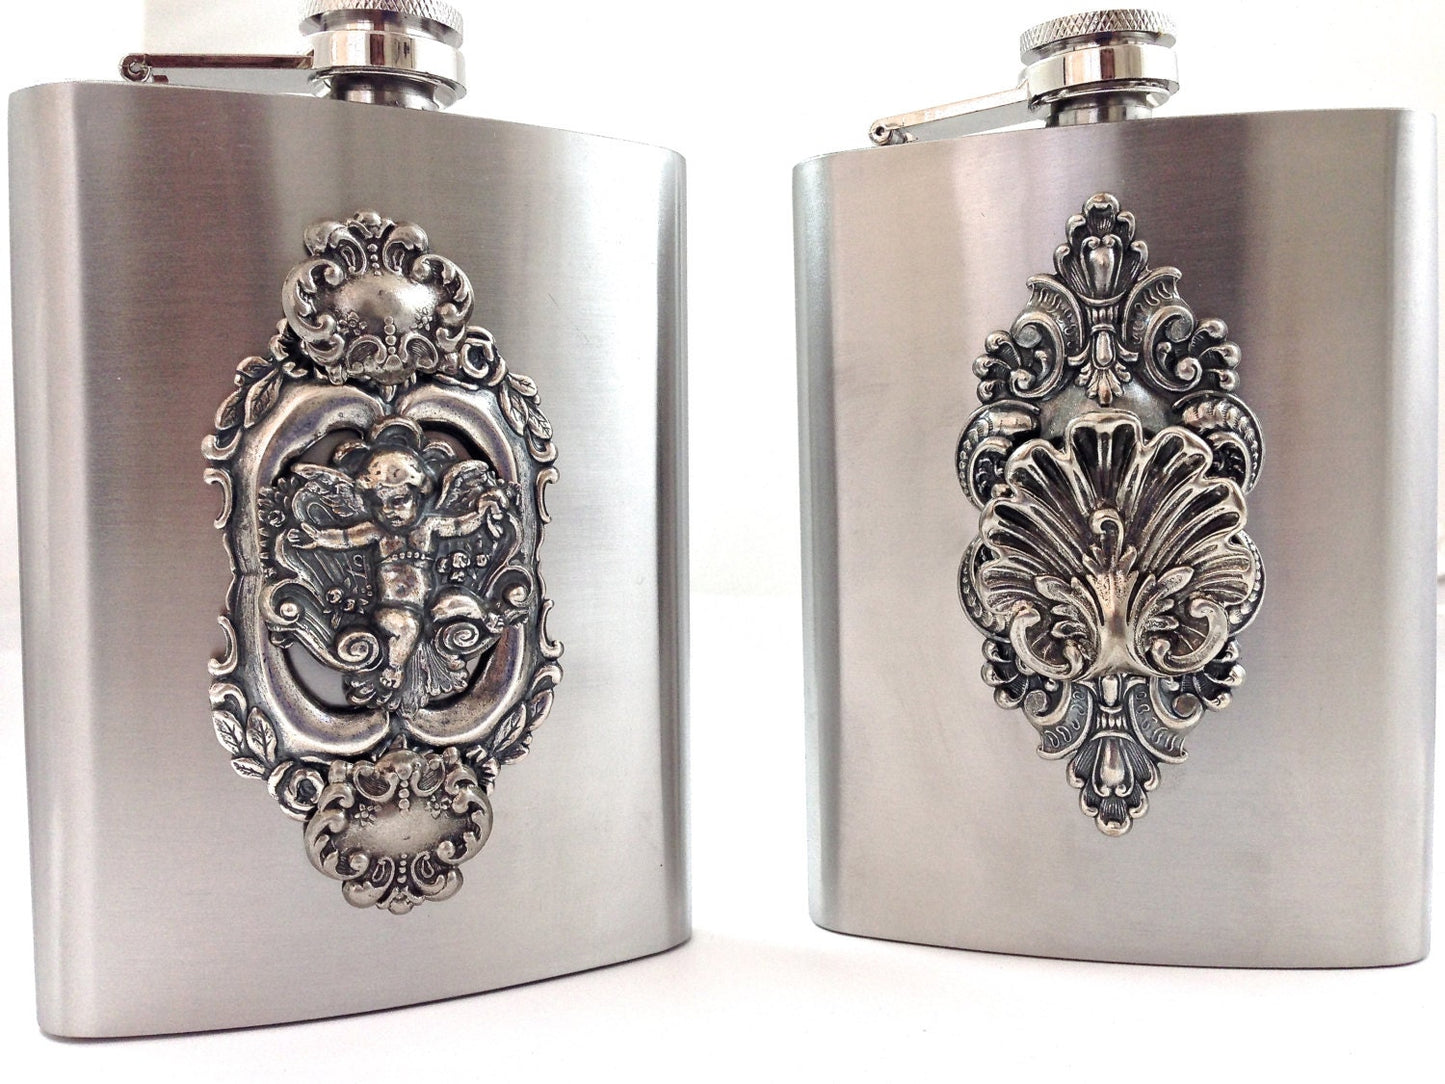 Vintage Inspired Stainless Steel Flask, Cherub or Chippendale, vintage silver, each